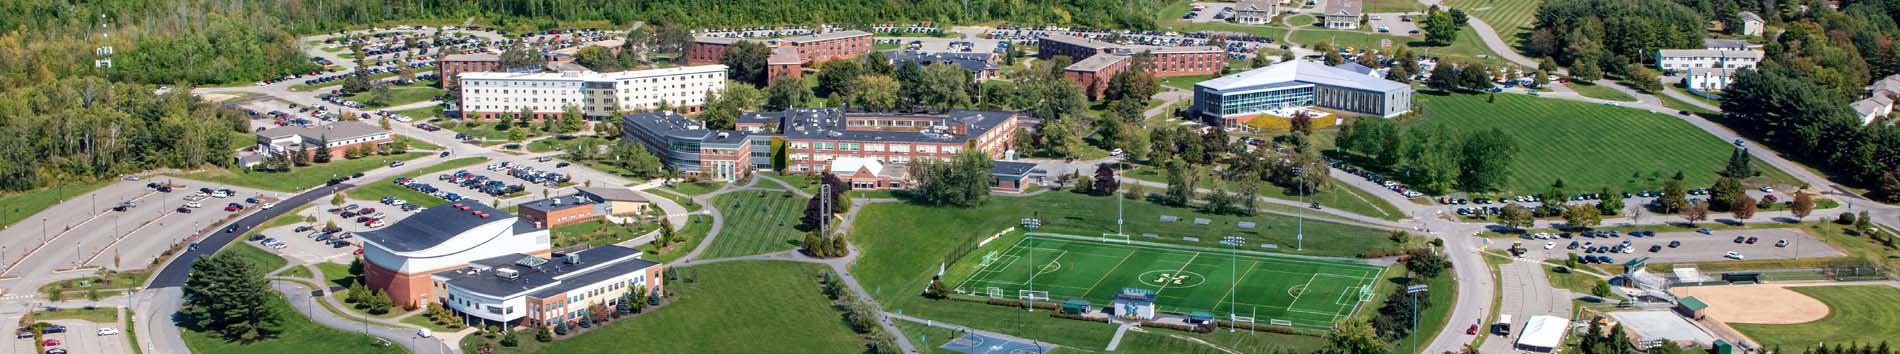 An aerial view of the campus of Husson University